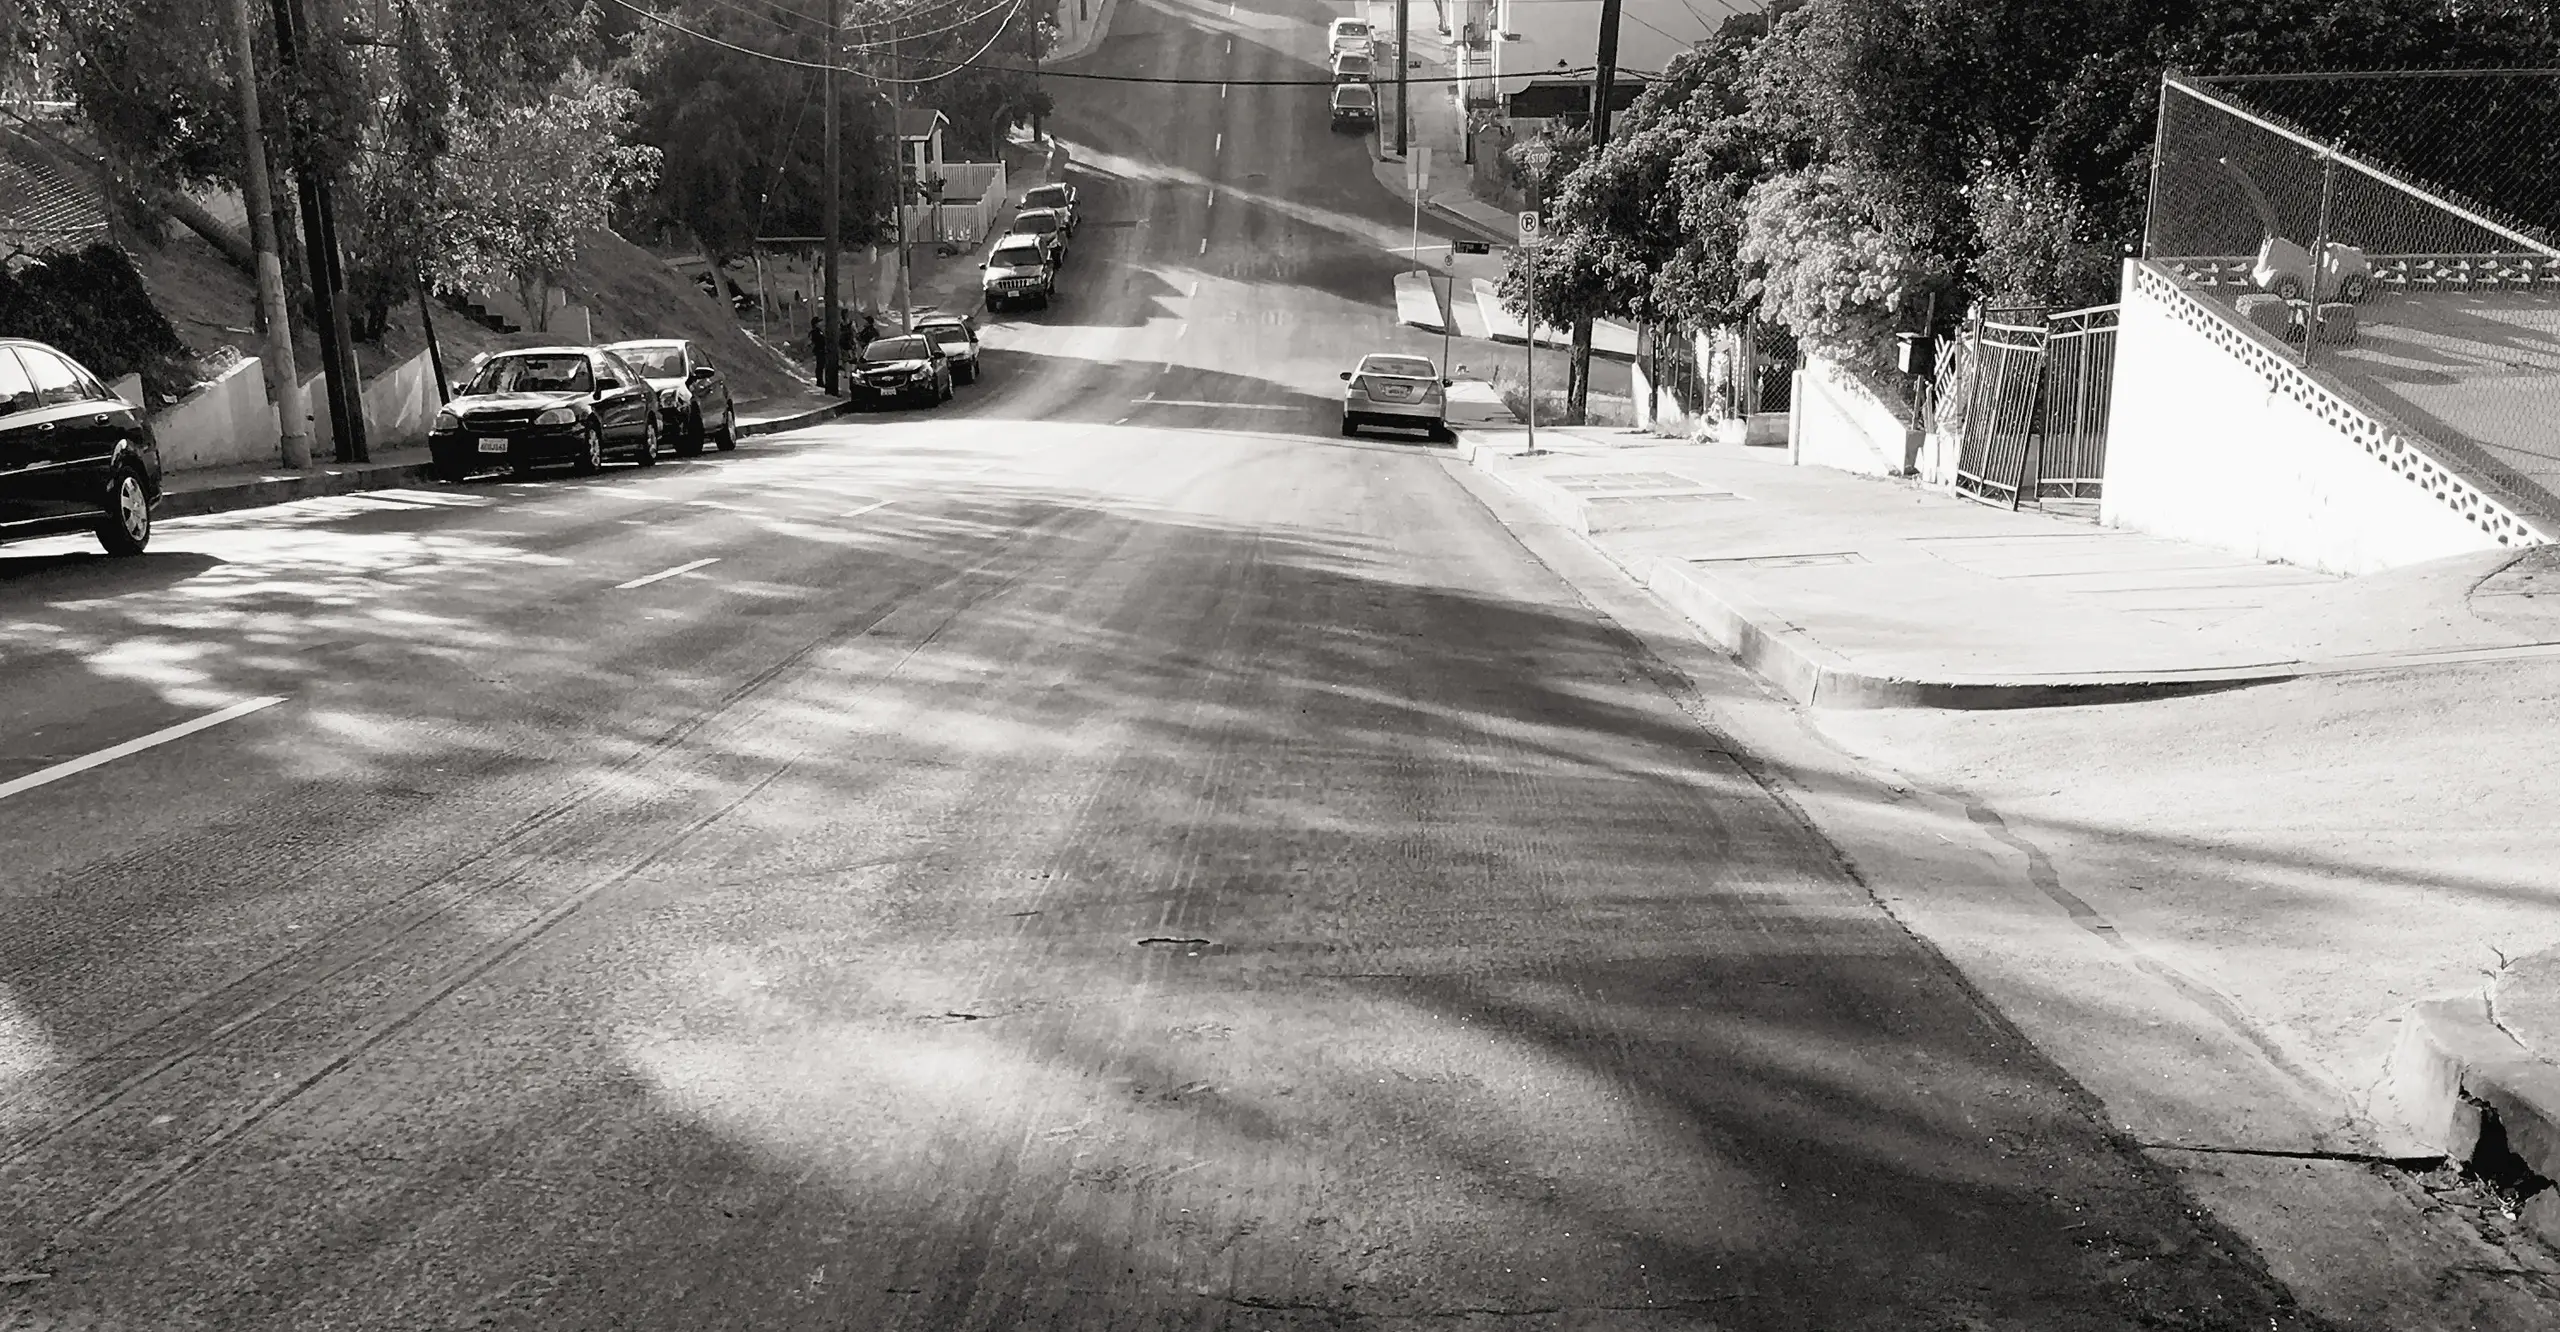 b/w picture of a street